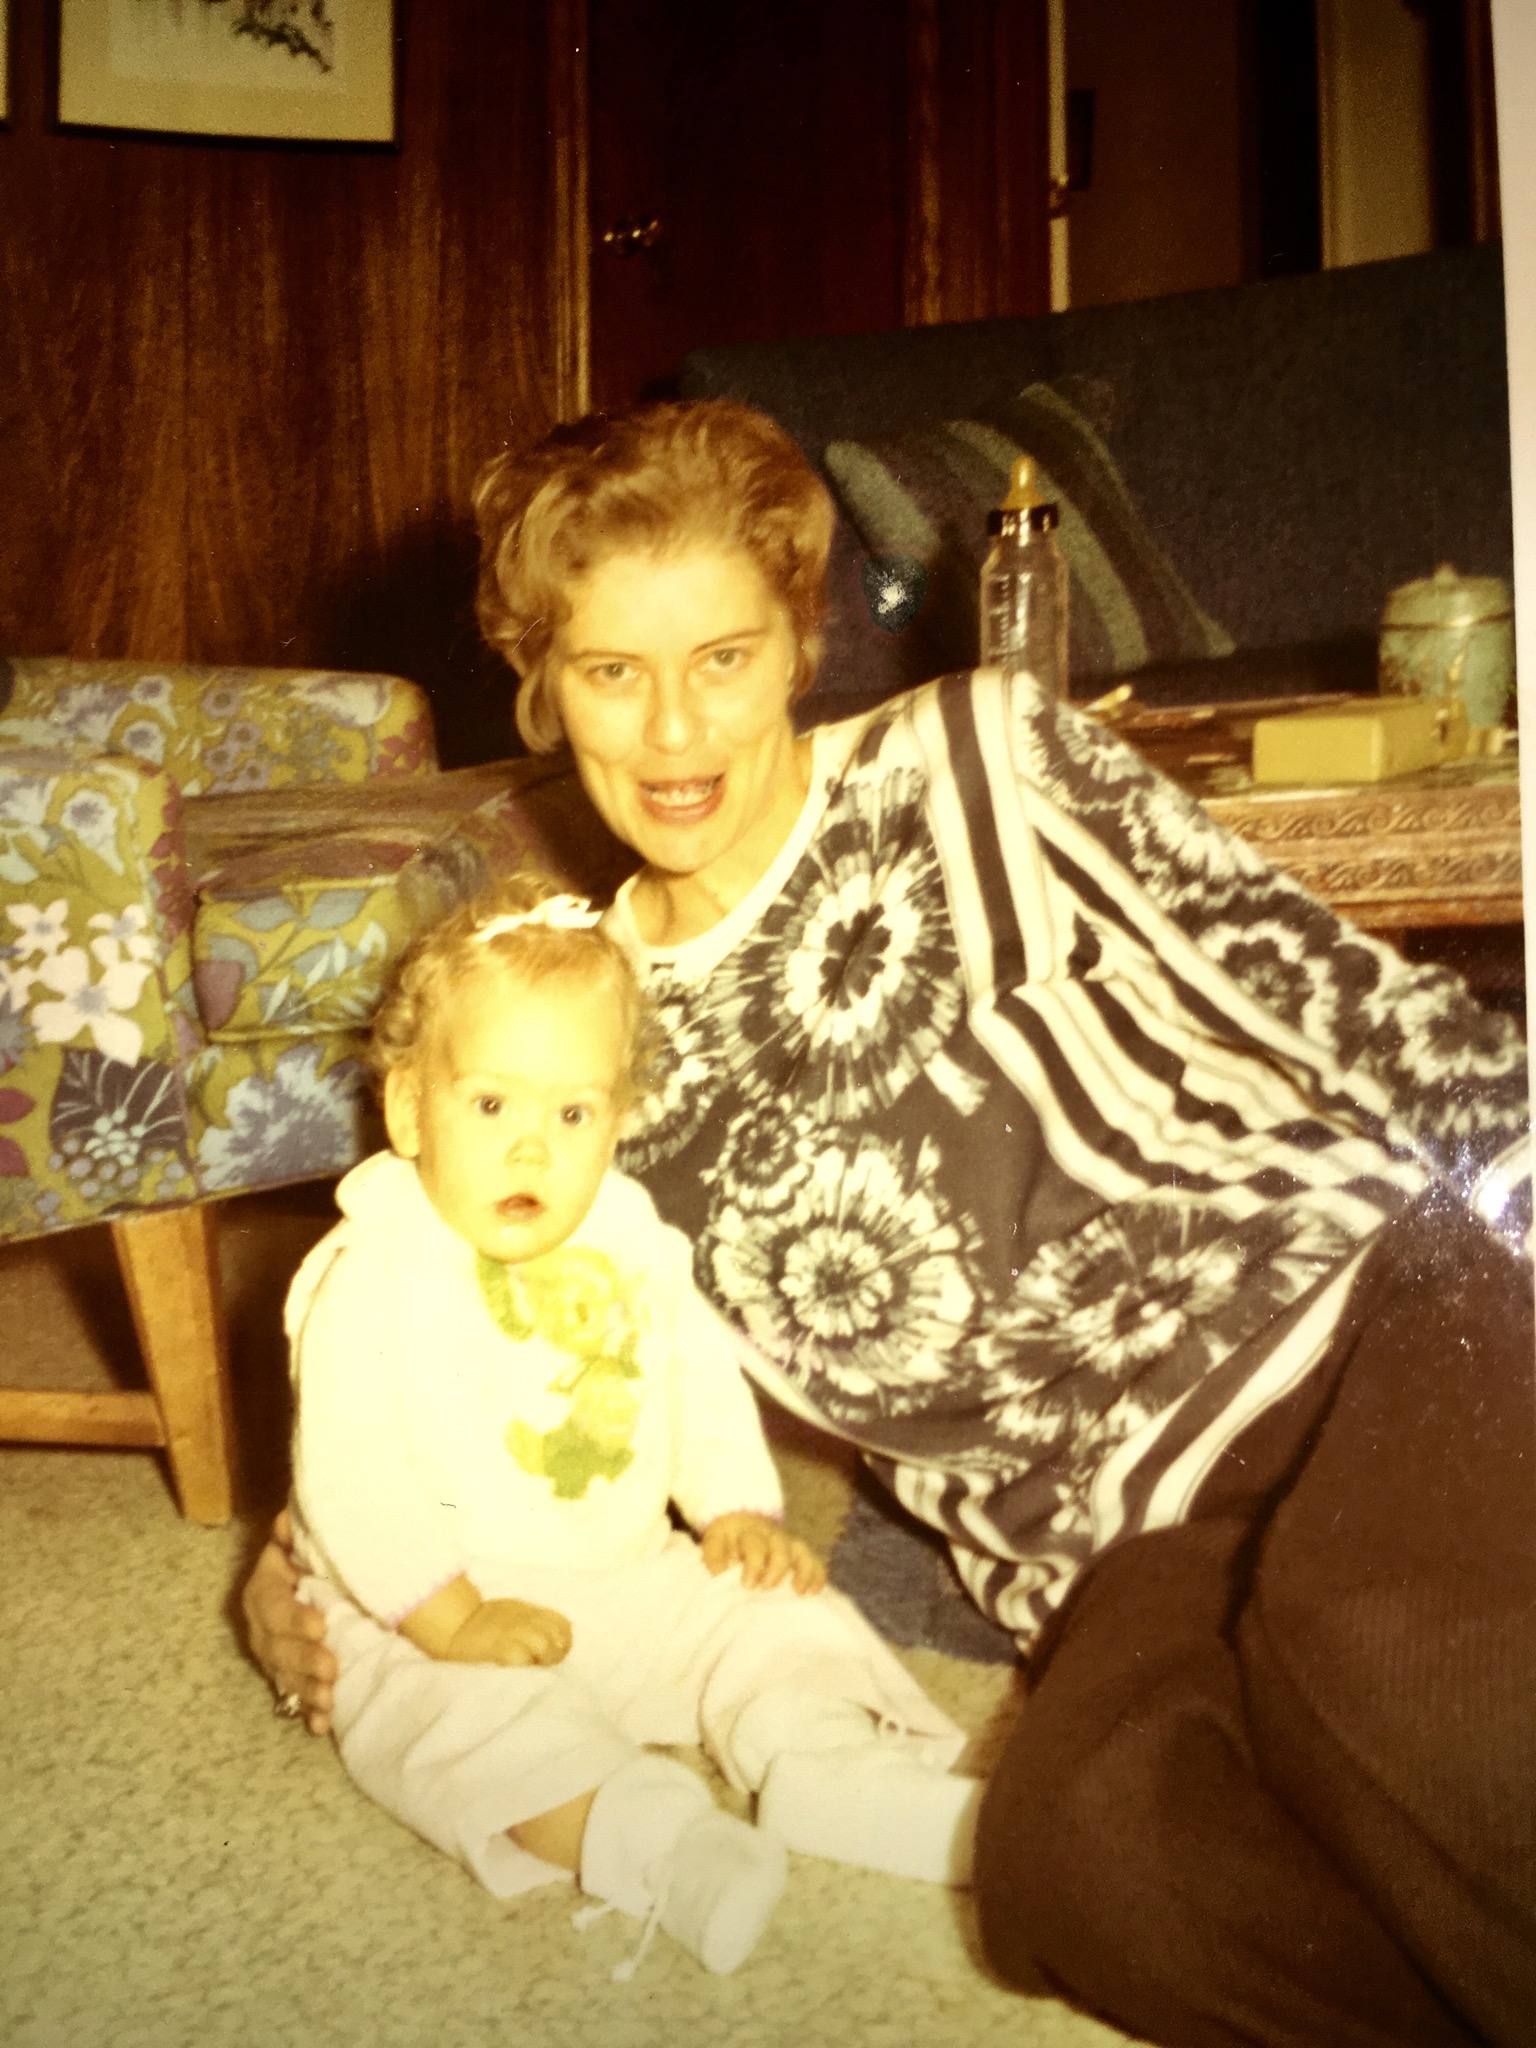 My lovely Aunt Jackie will be missed....she was so fun&sweet-always made us laugh in joy!RIP Aunt J<br />
We love you!!!!<br />
(Pic is Aunt J&me!)